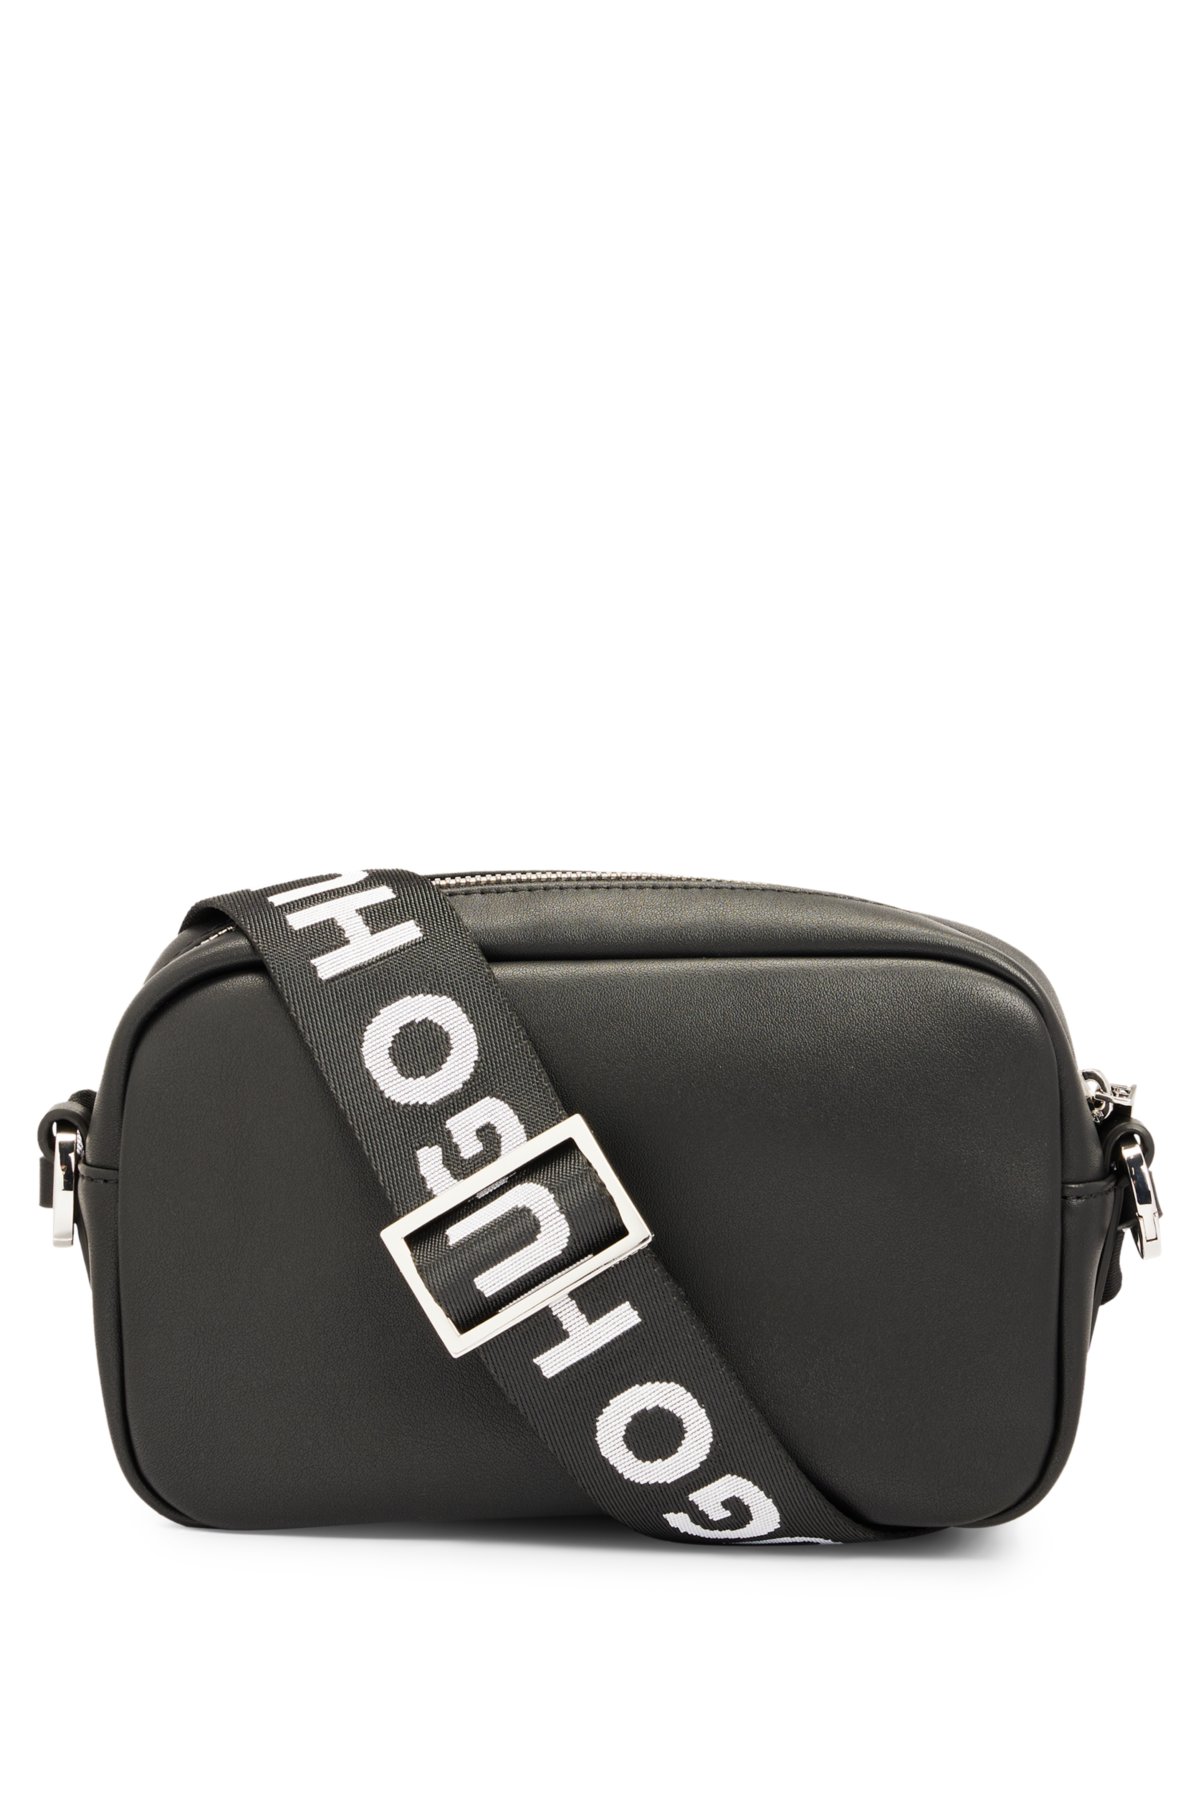 Faux-leather crossbody bag with debossed stacked logo, Black